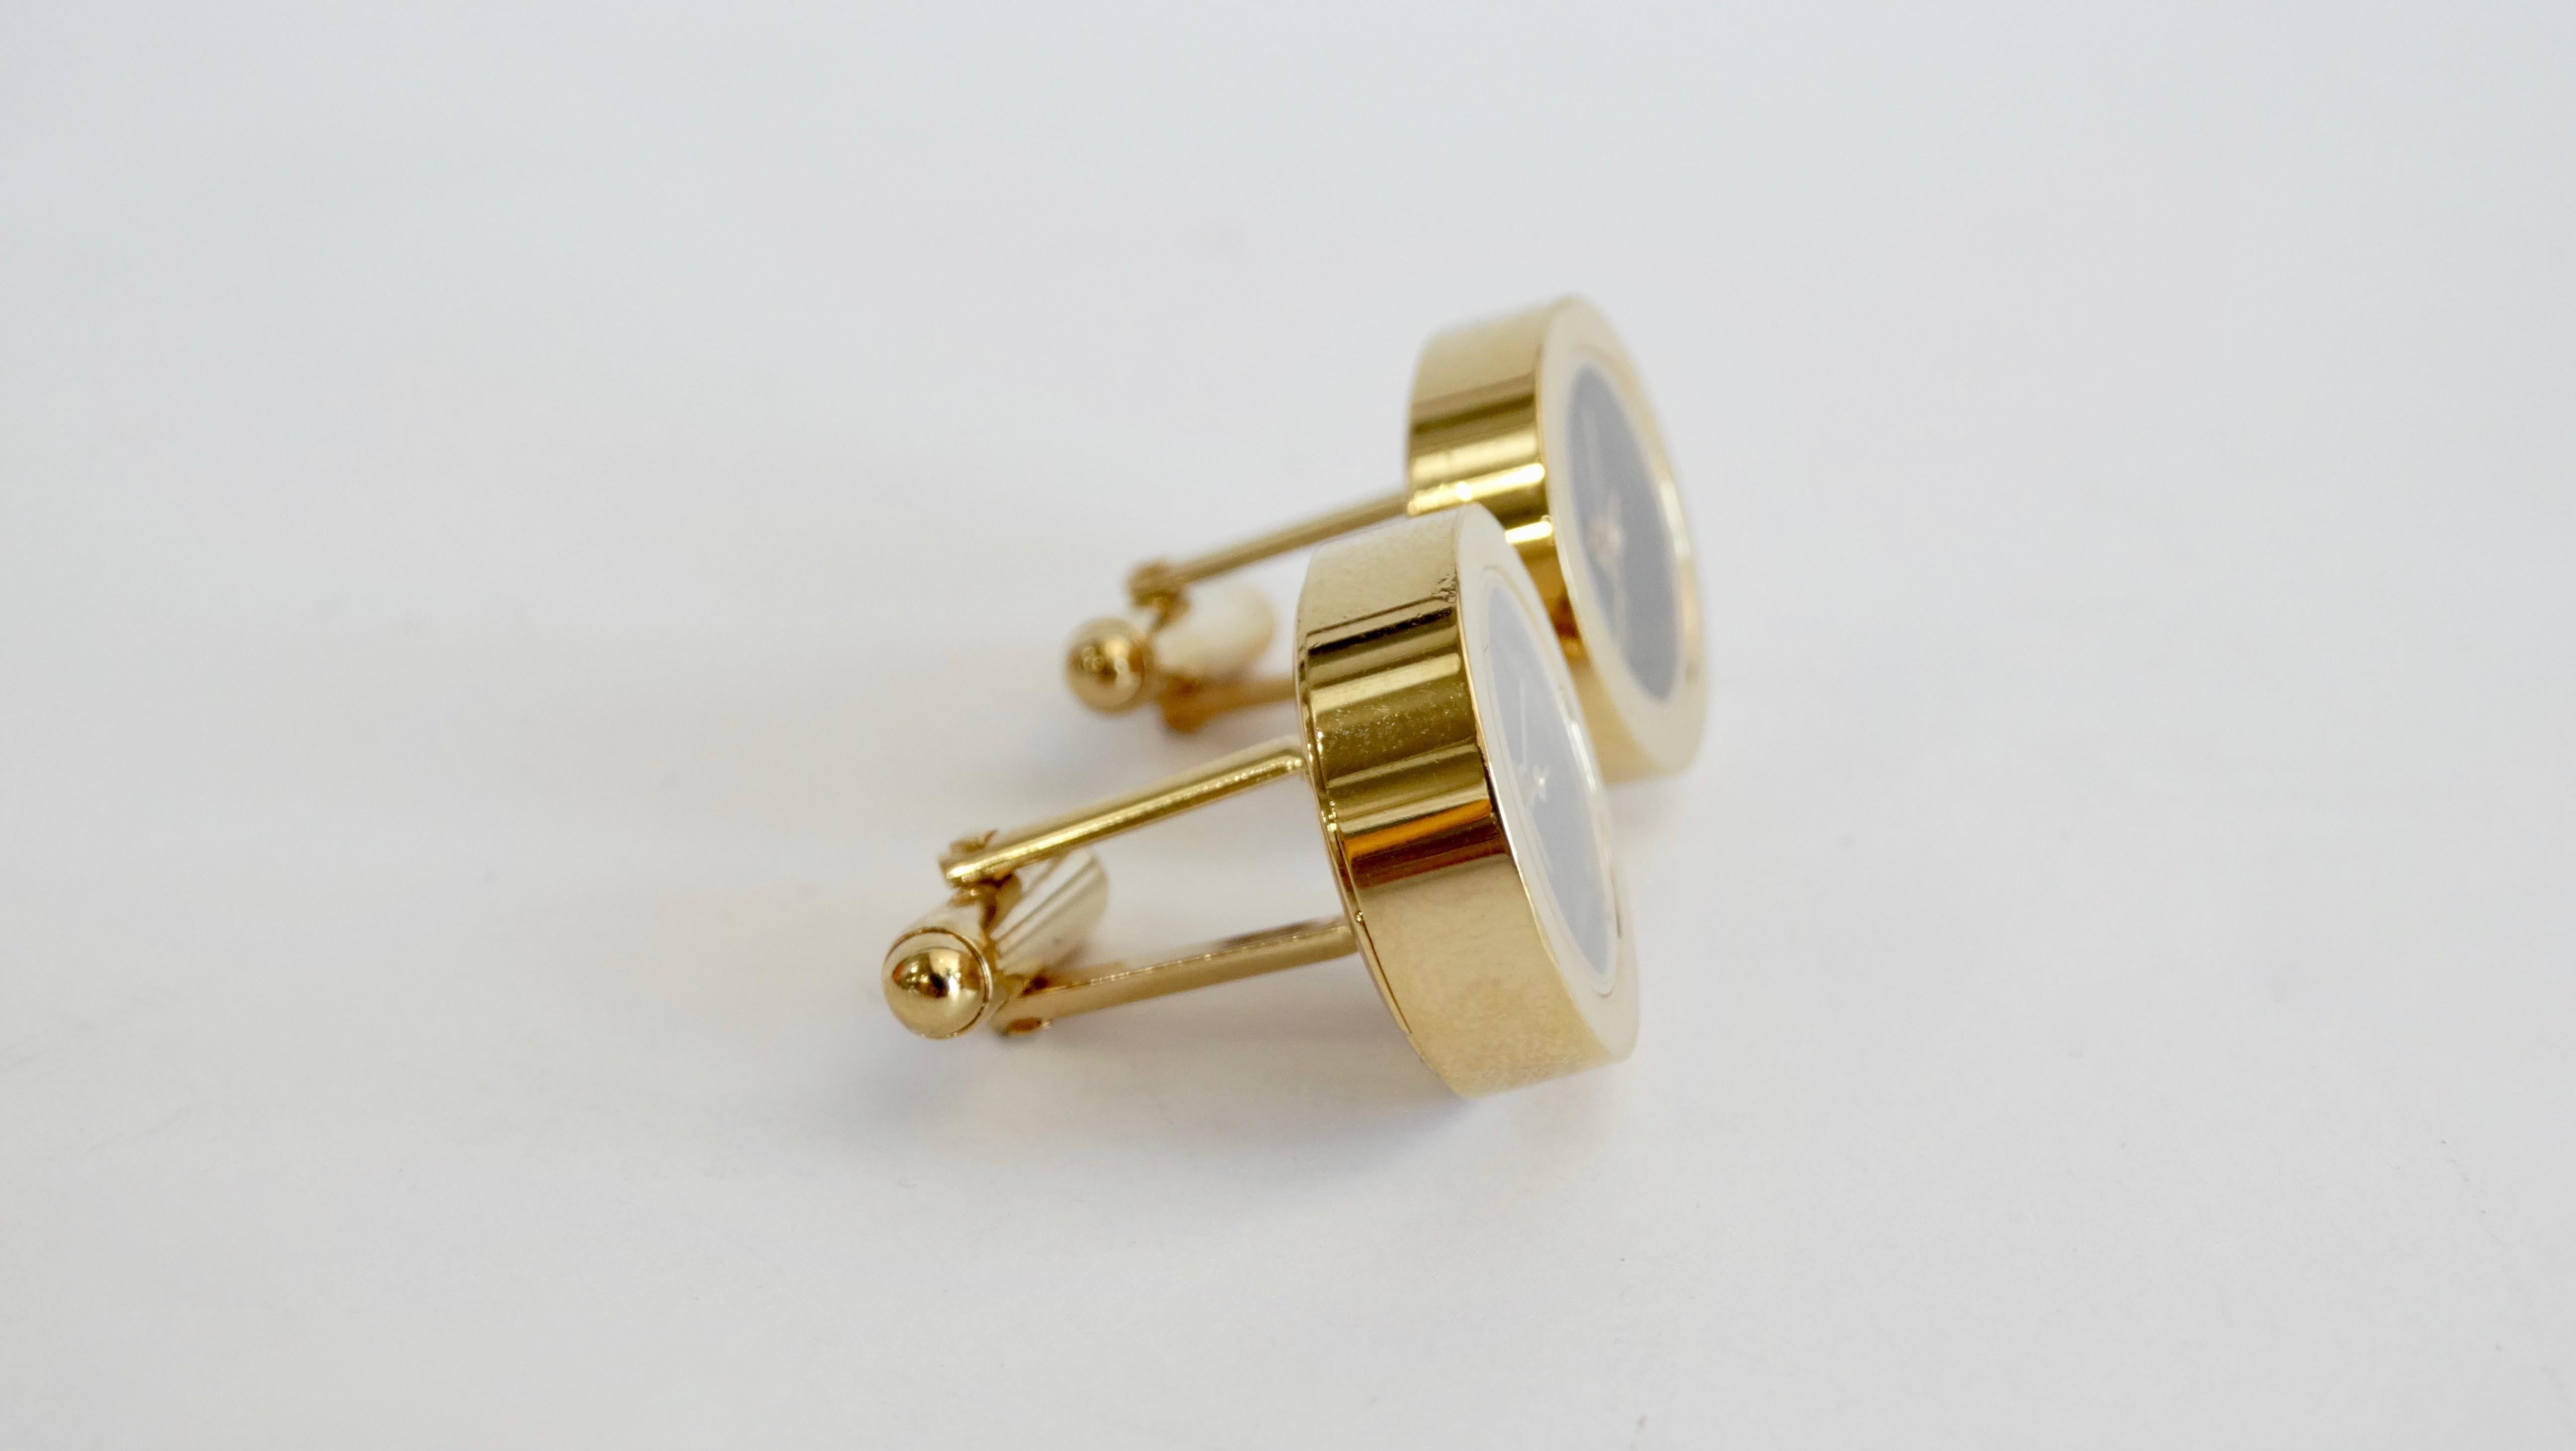 Make a subtle statement with these amazing Tateossian cufflinks! Circa late 90s/ early 2000s, these more rare cufflinks are made of gold plated stainless steel. The clock features a black dial, gold number markers, and manual wind. The perfect